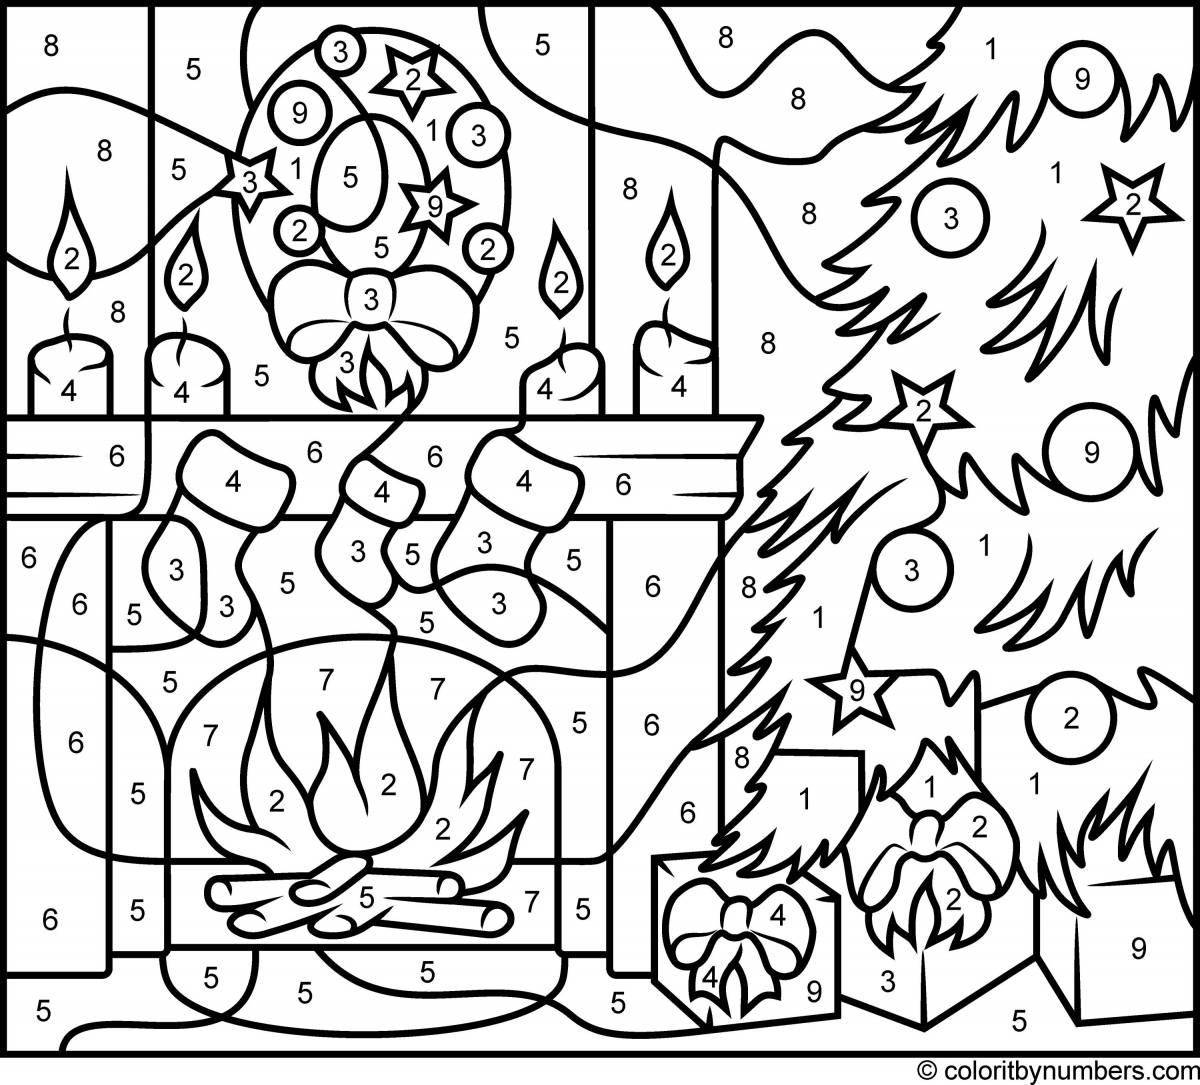 Colored tree by numbers coloring book